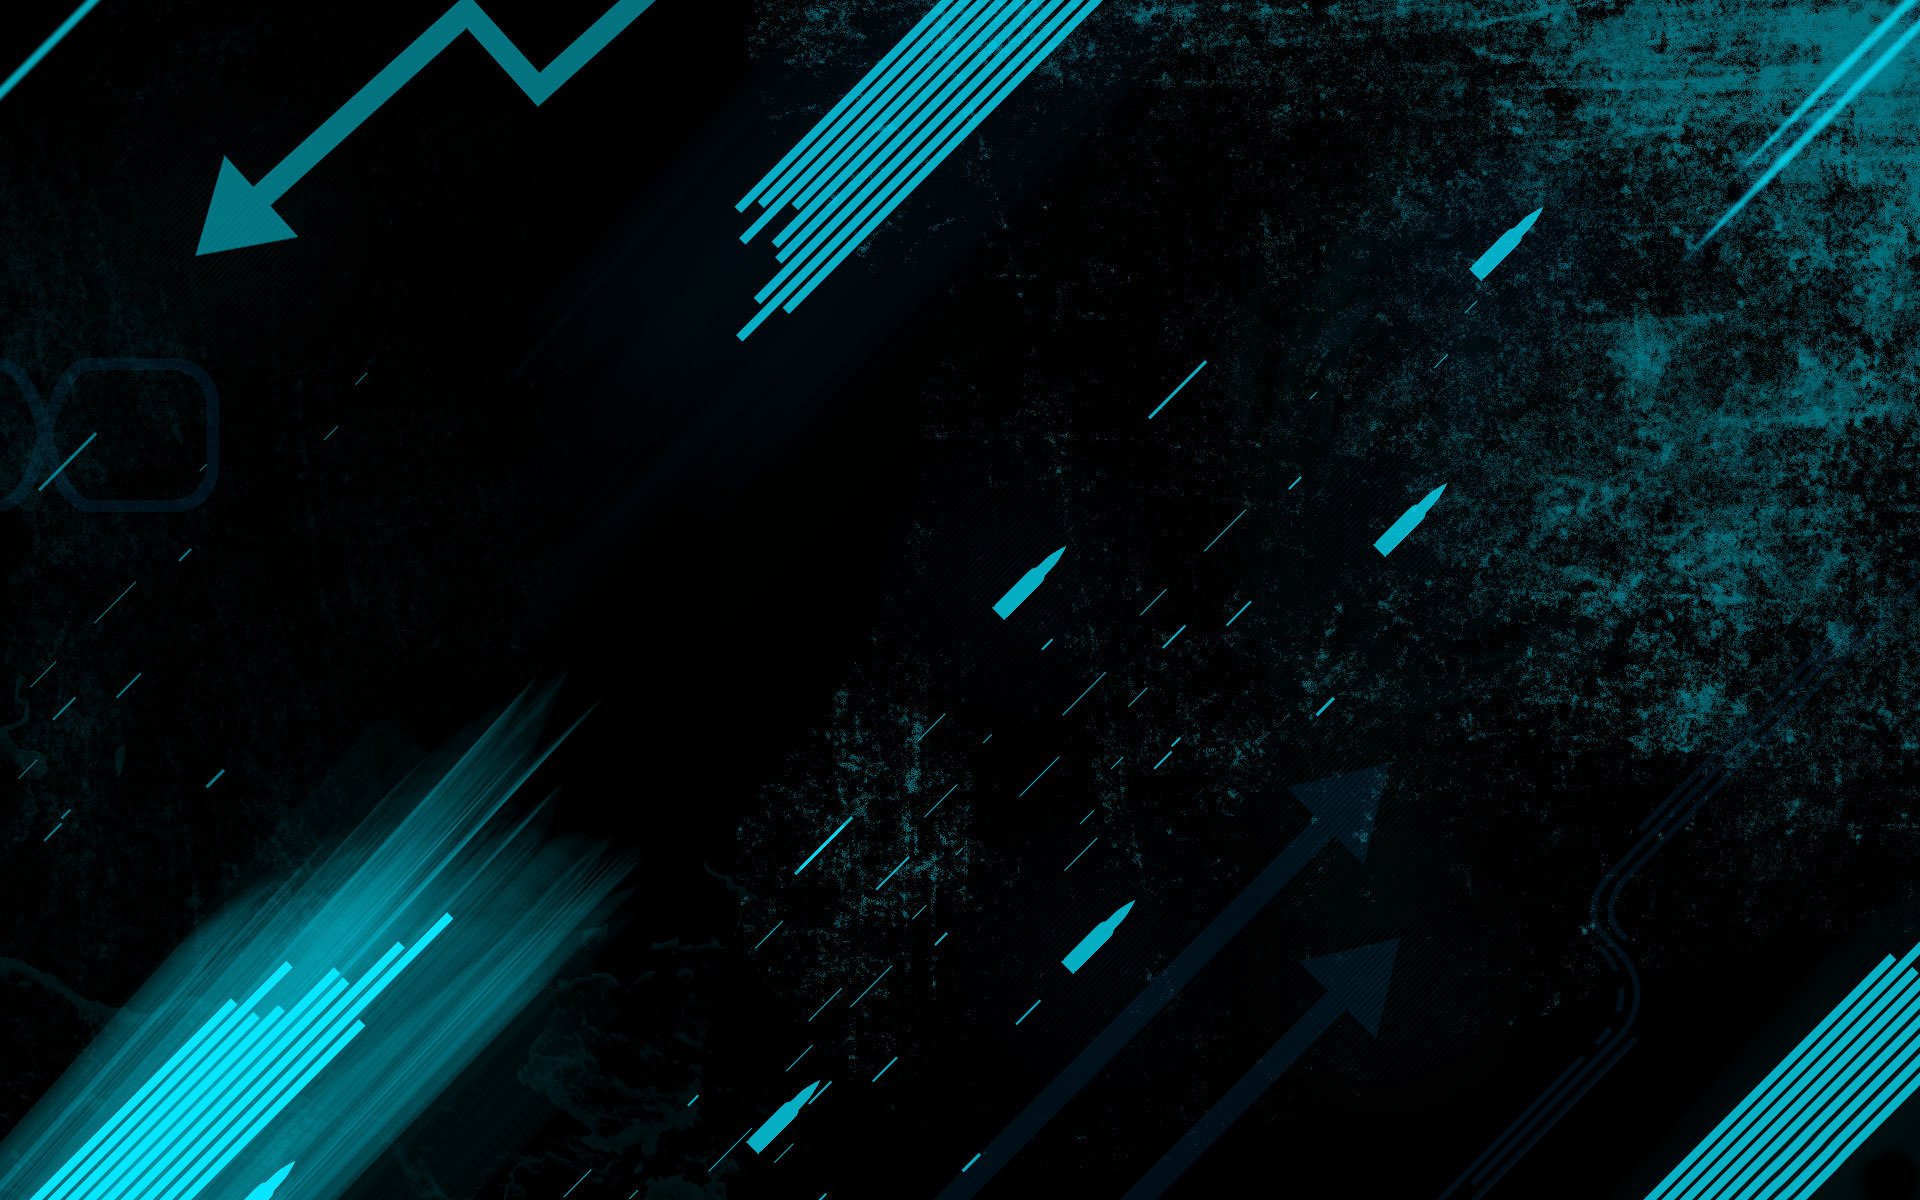 Abstract Turquoise HD Wallpaper | Background Image | 1920x1200
